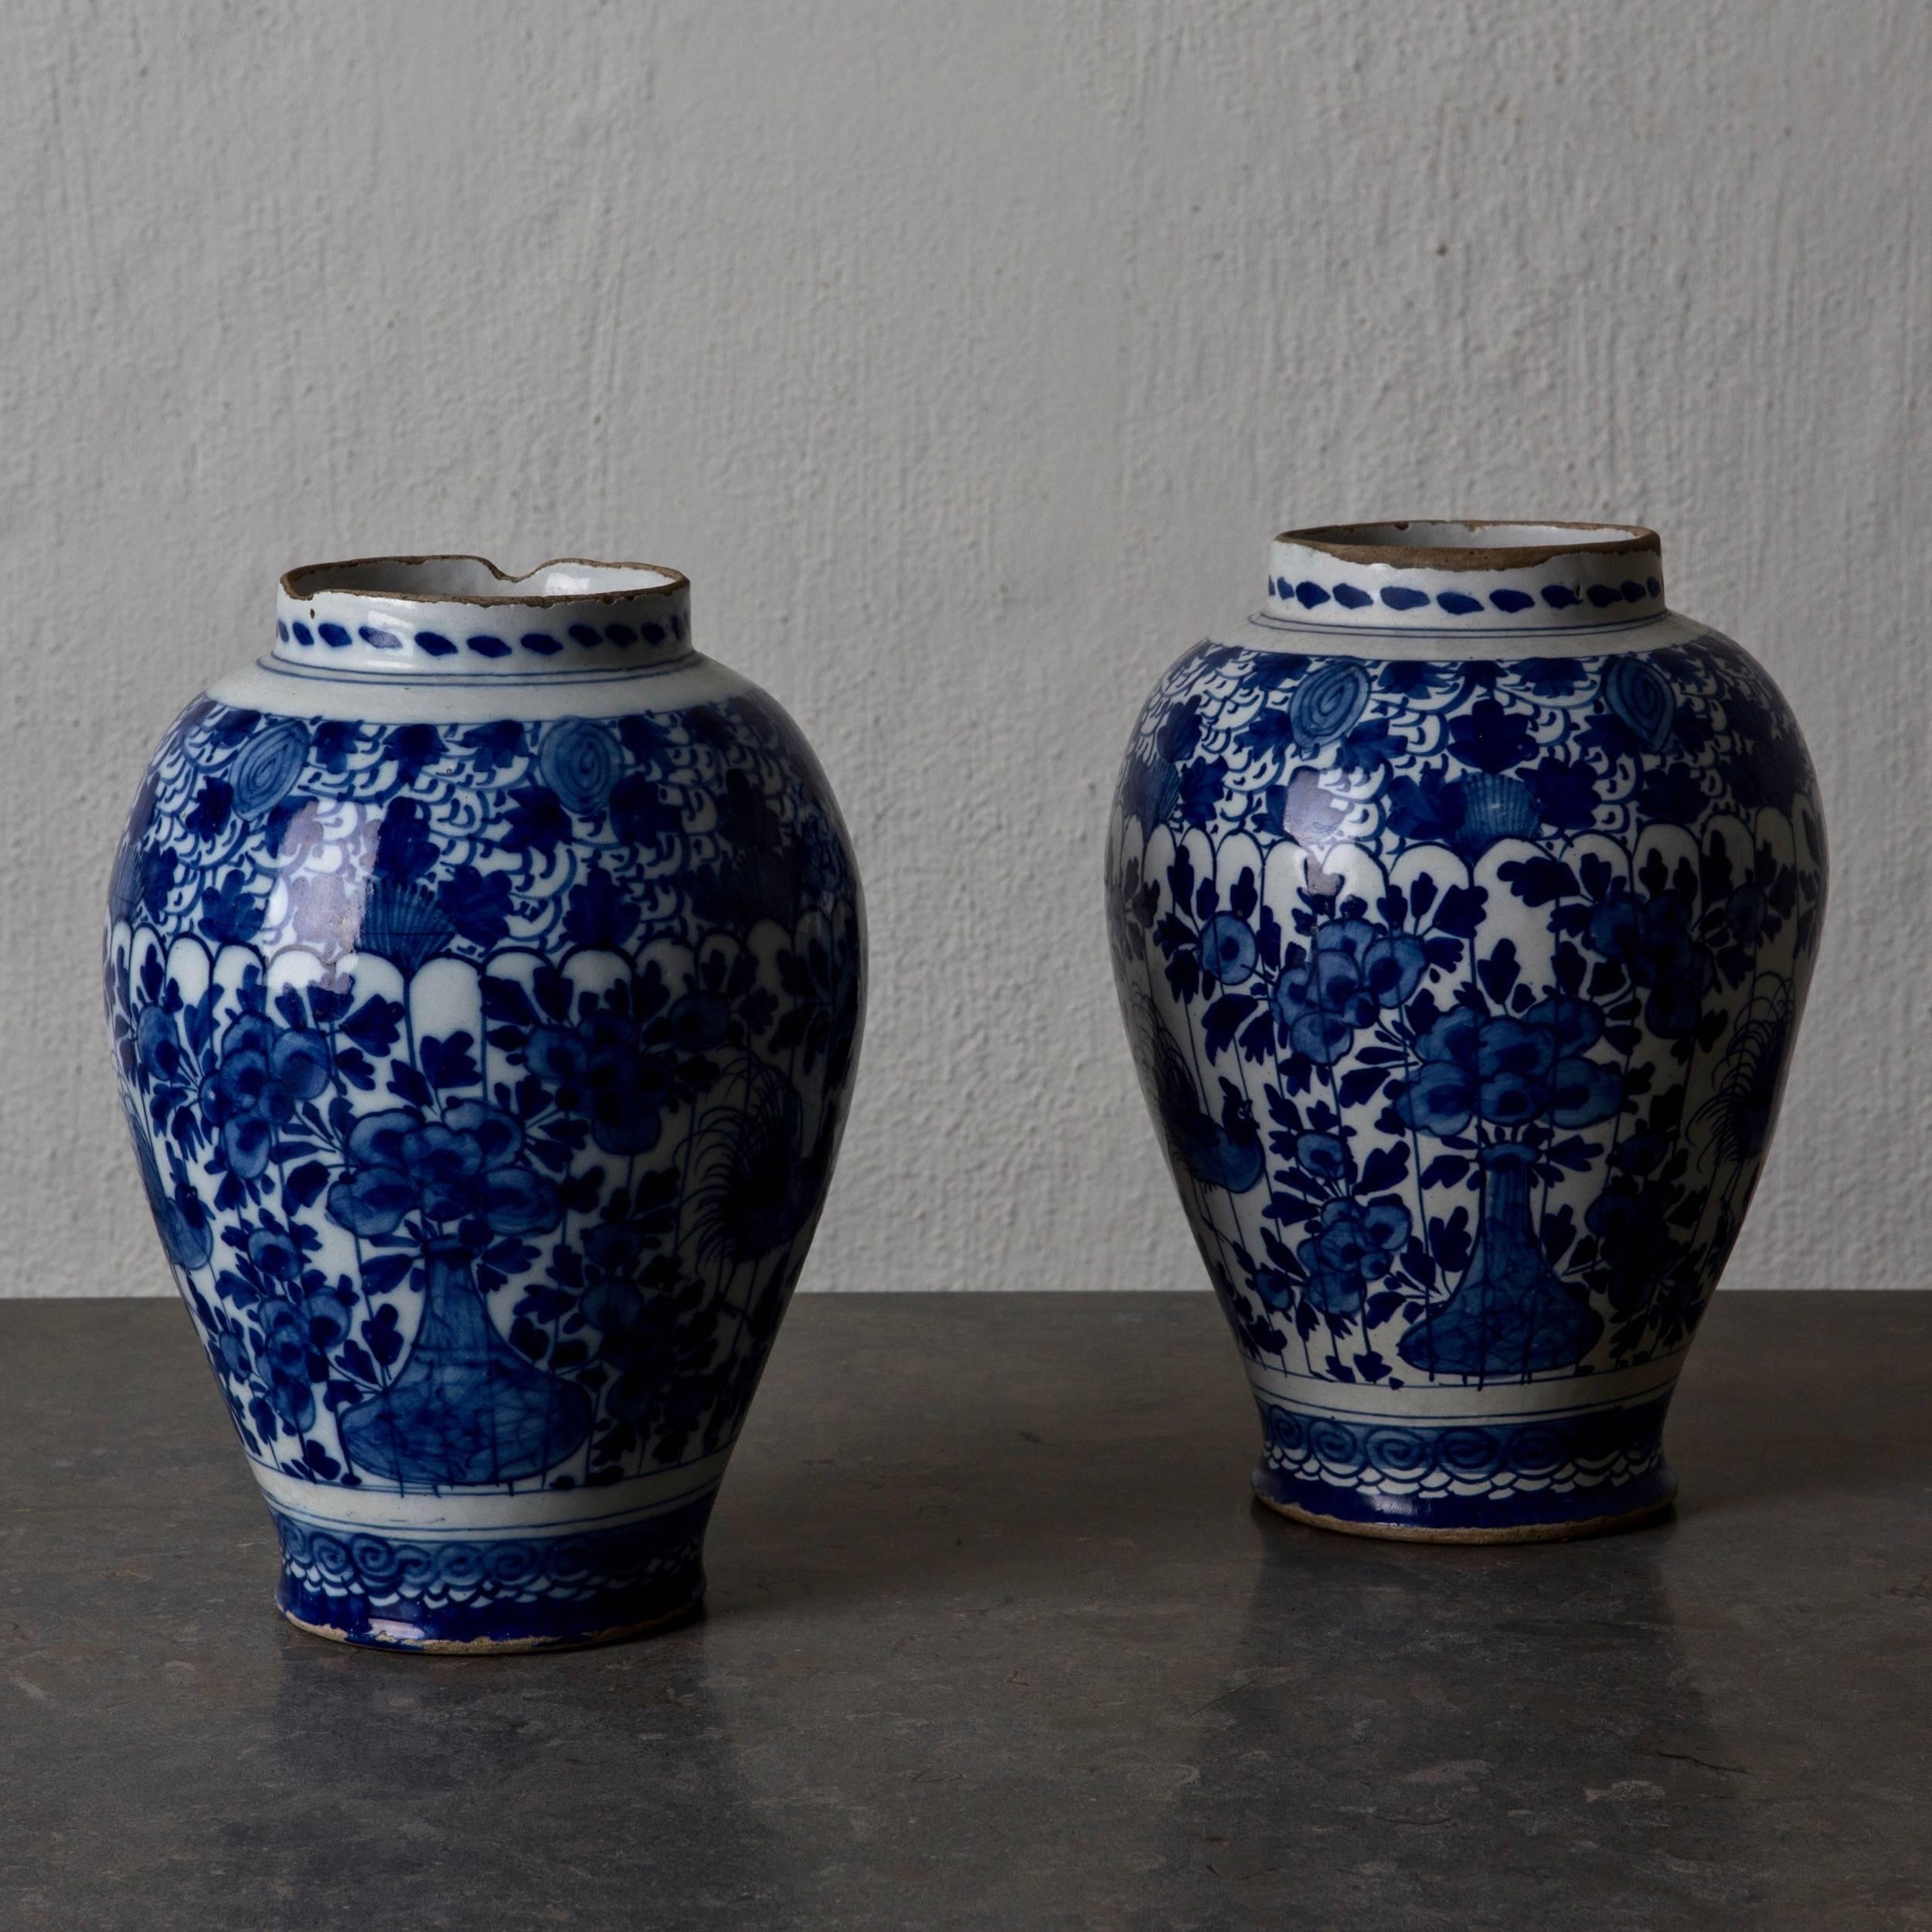 Urns pair of delft blue and white 18th century, Holland. A pair of stunning urns made during the 18th century in Delft, Holland. Glazed pottery in blue and white.